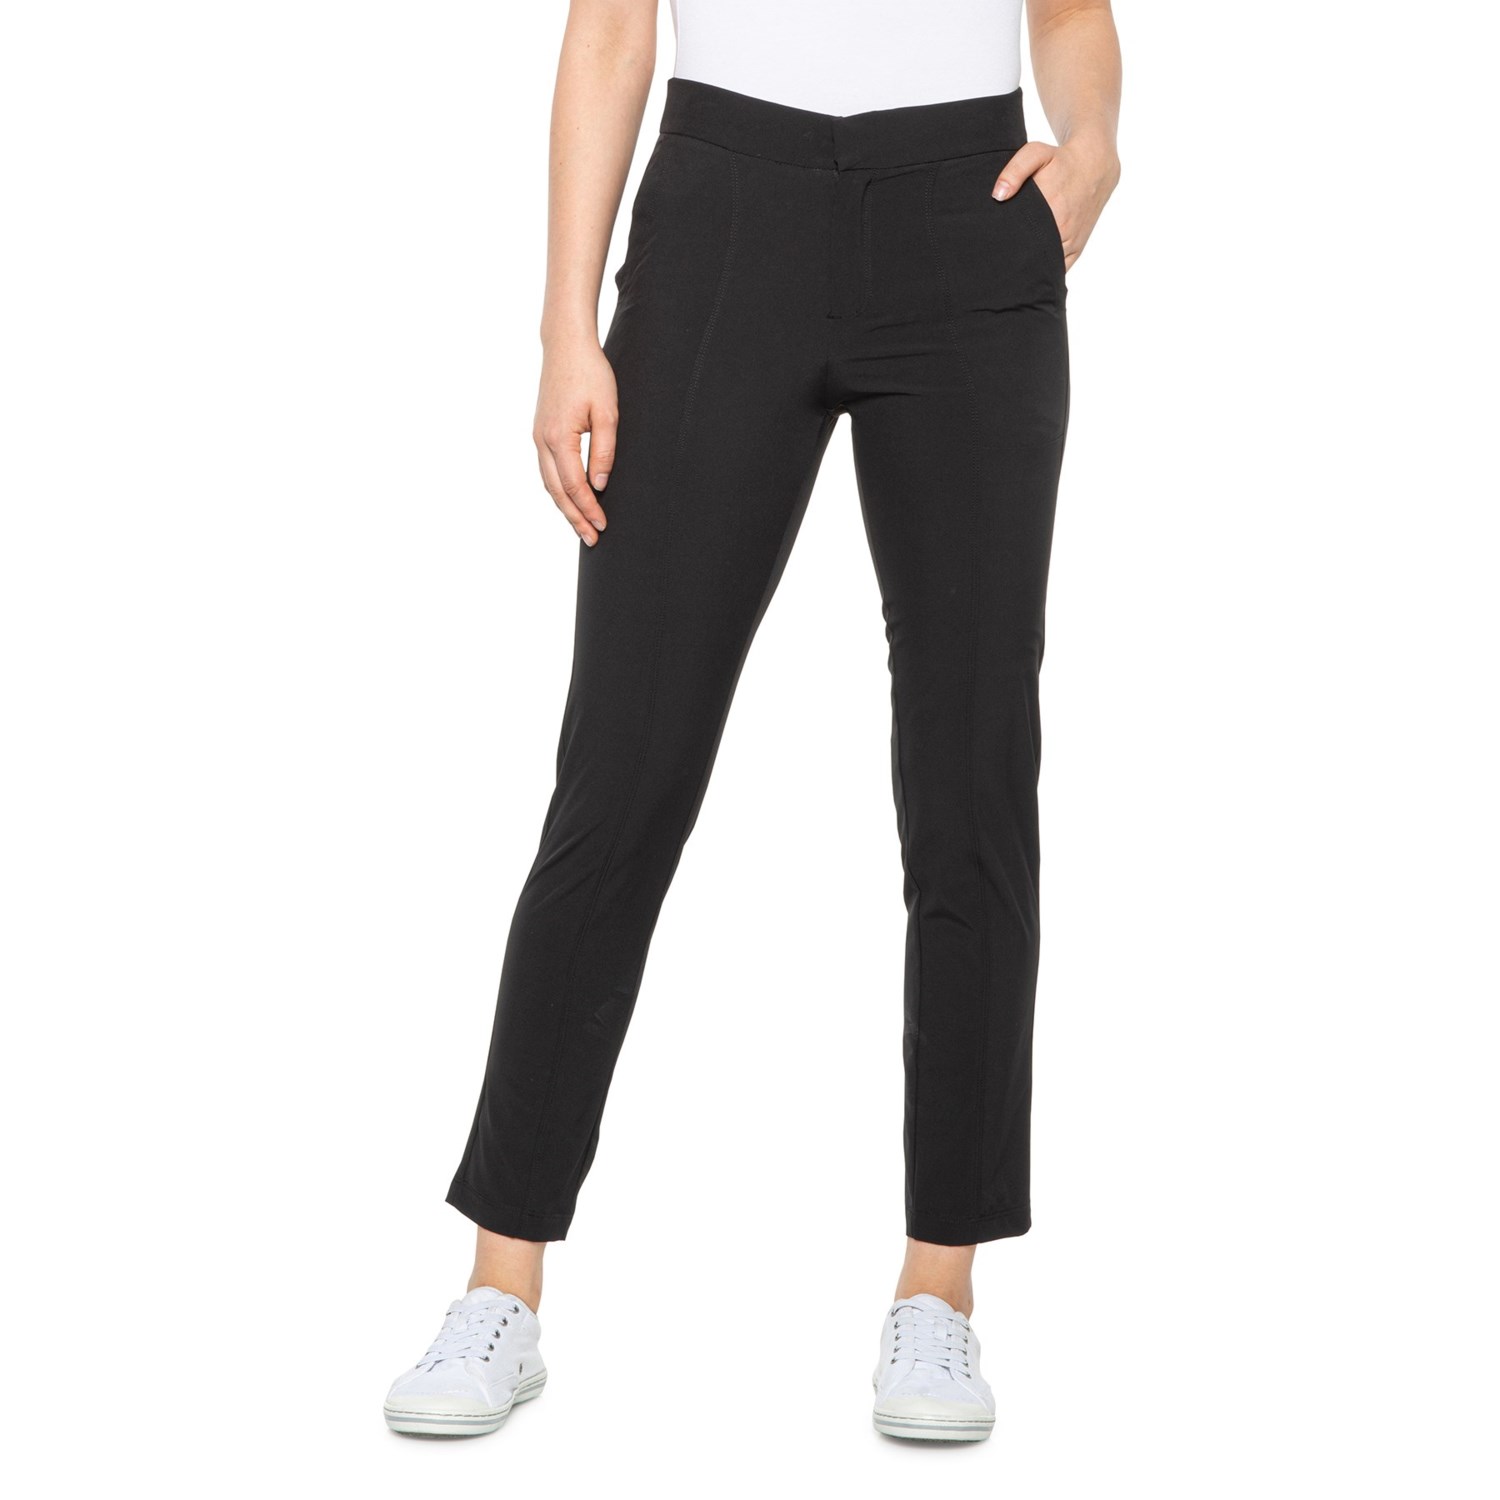 Kyodan Woven Recycled Polyester Pants (For Women) - Save 64%